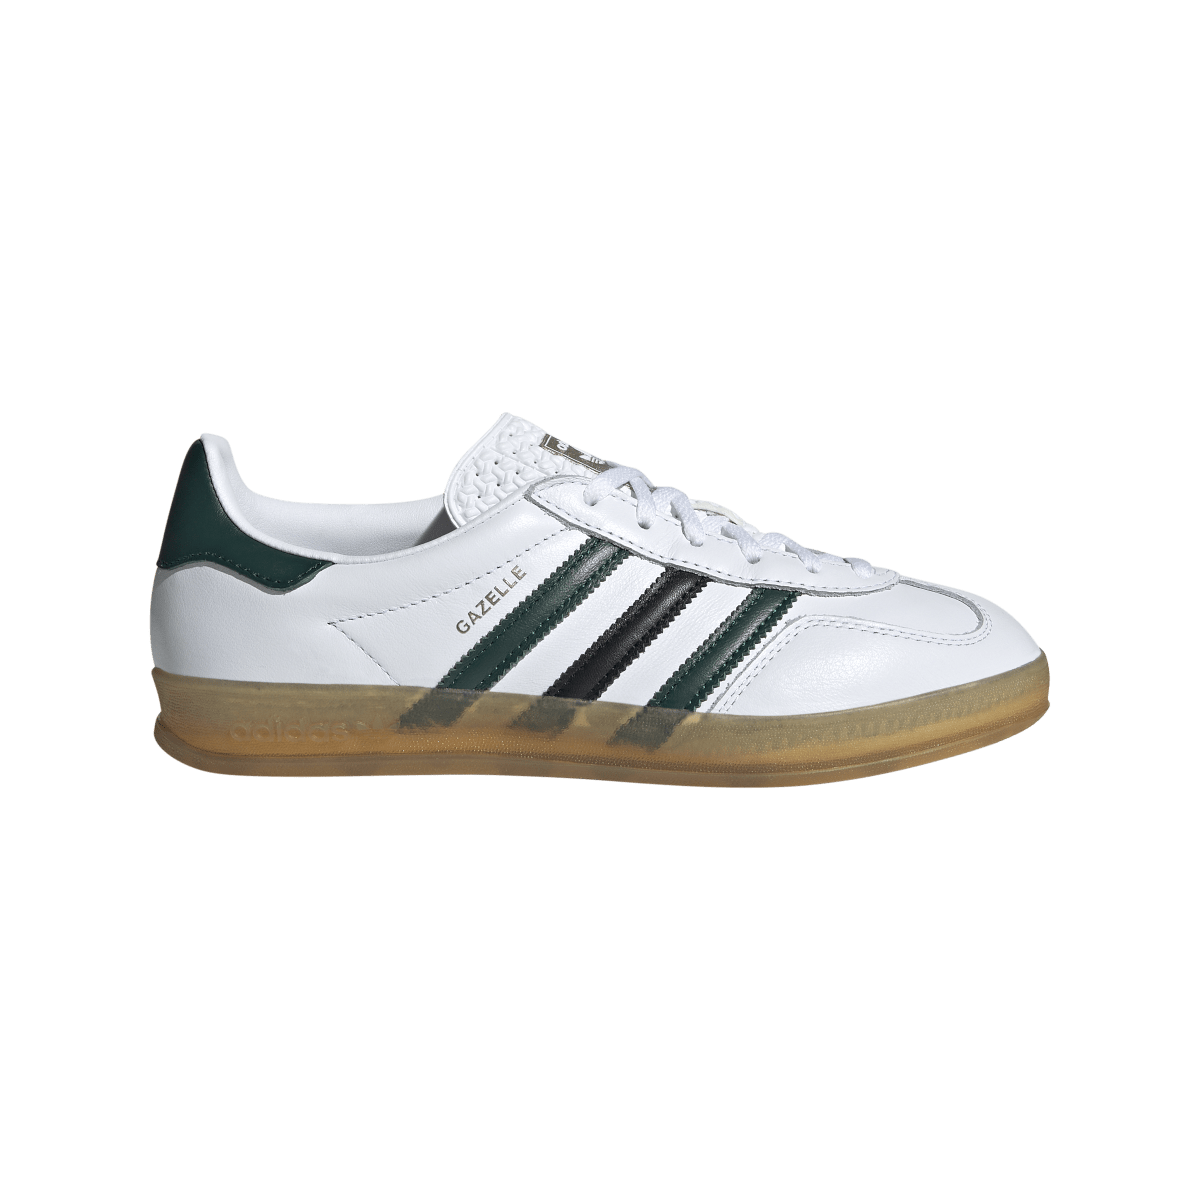 Chaussures adidas Femme - Sneakers & Claquette - JD Sports France